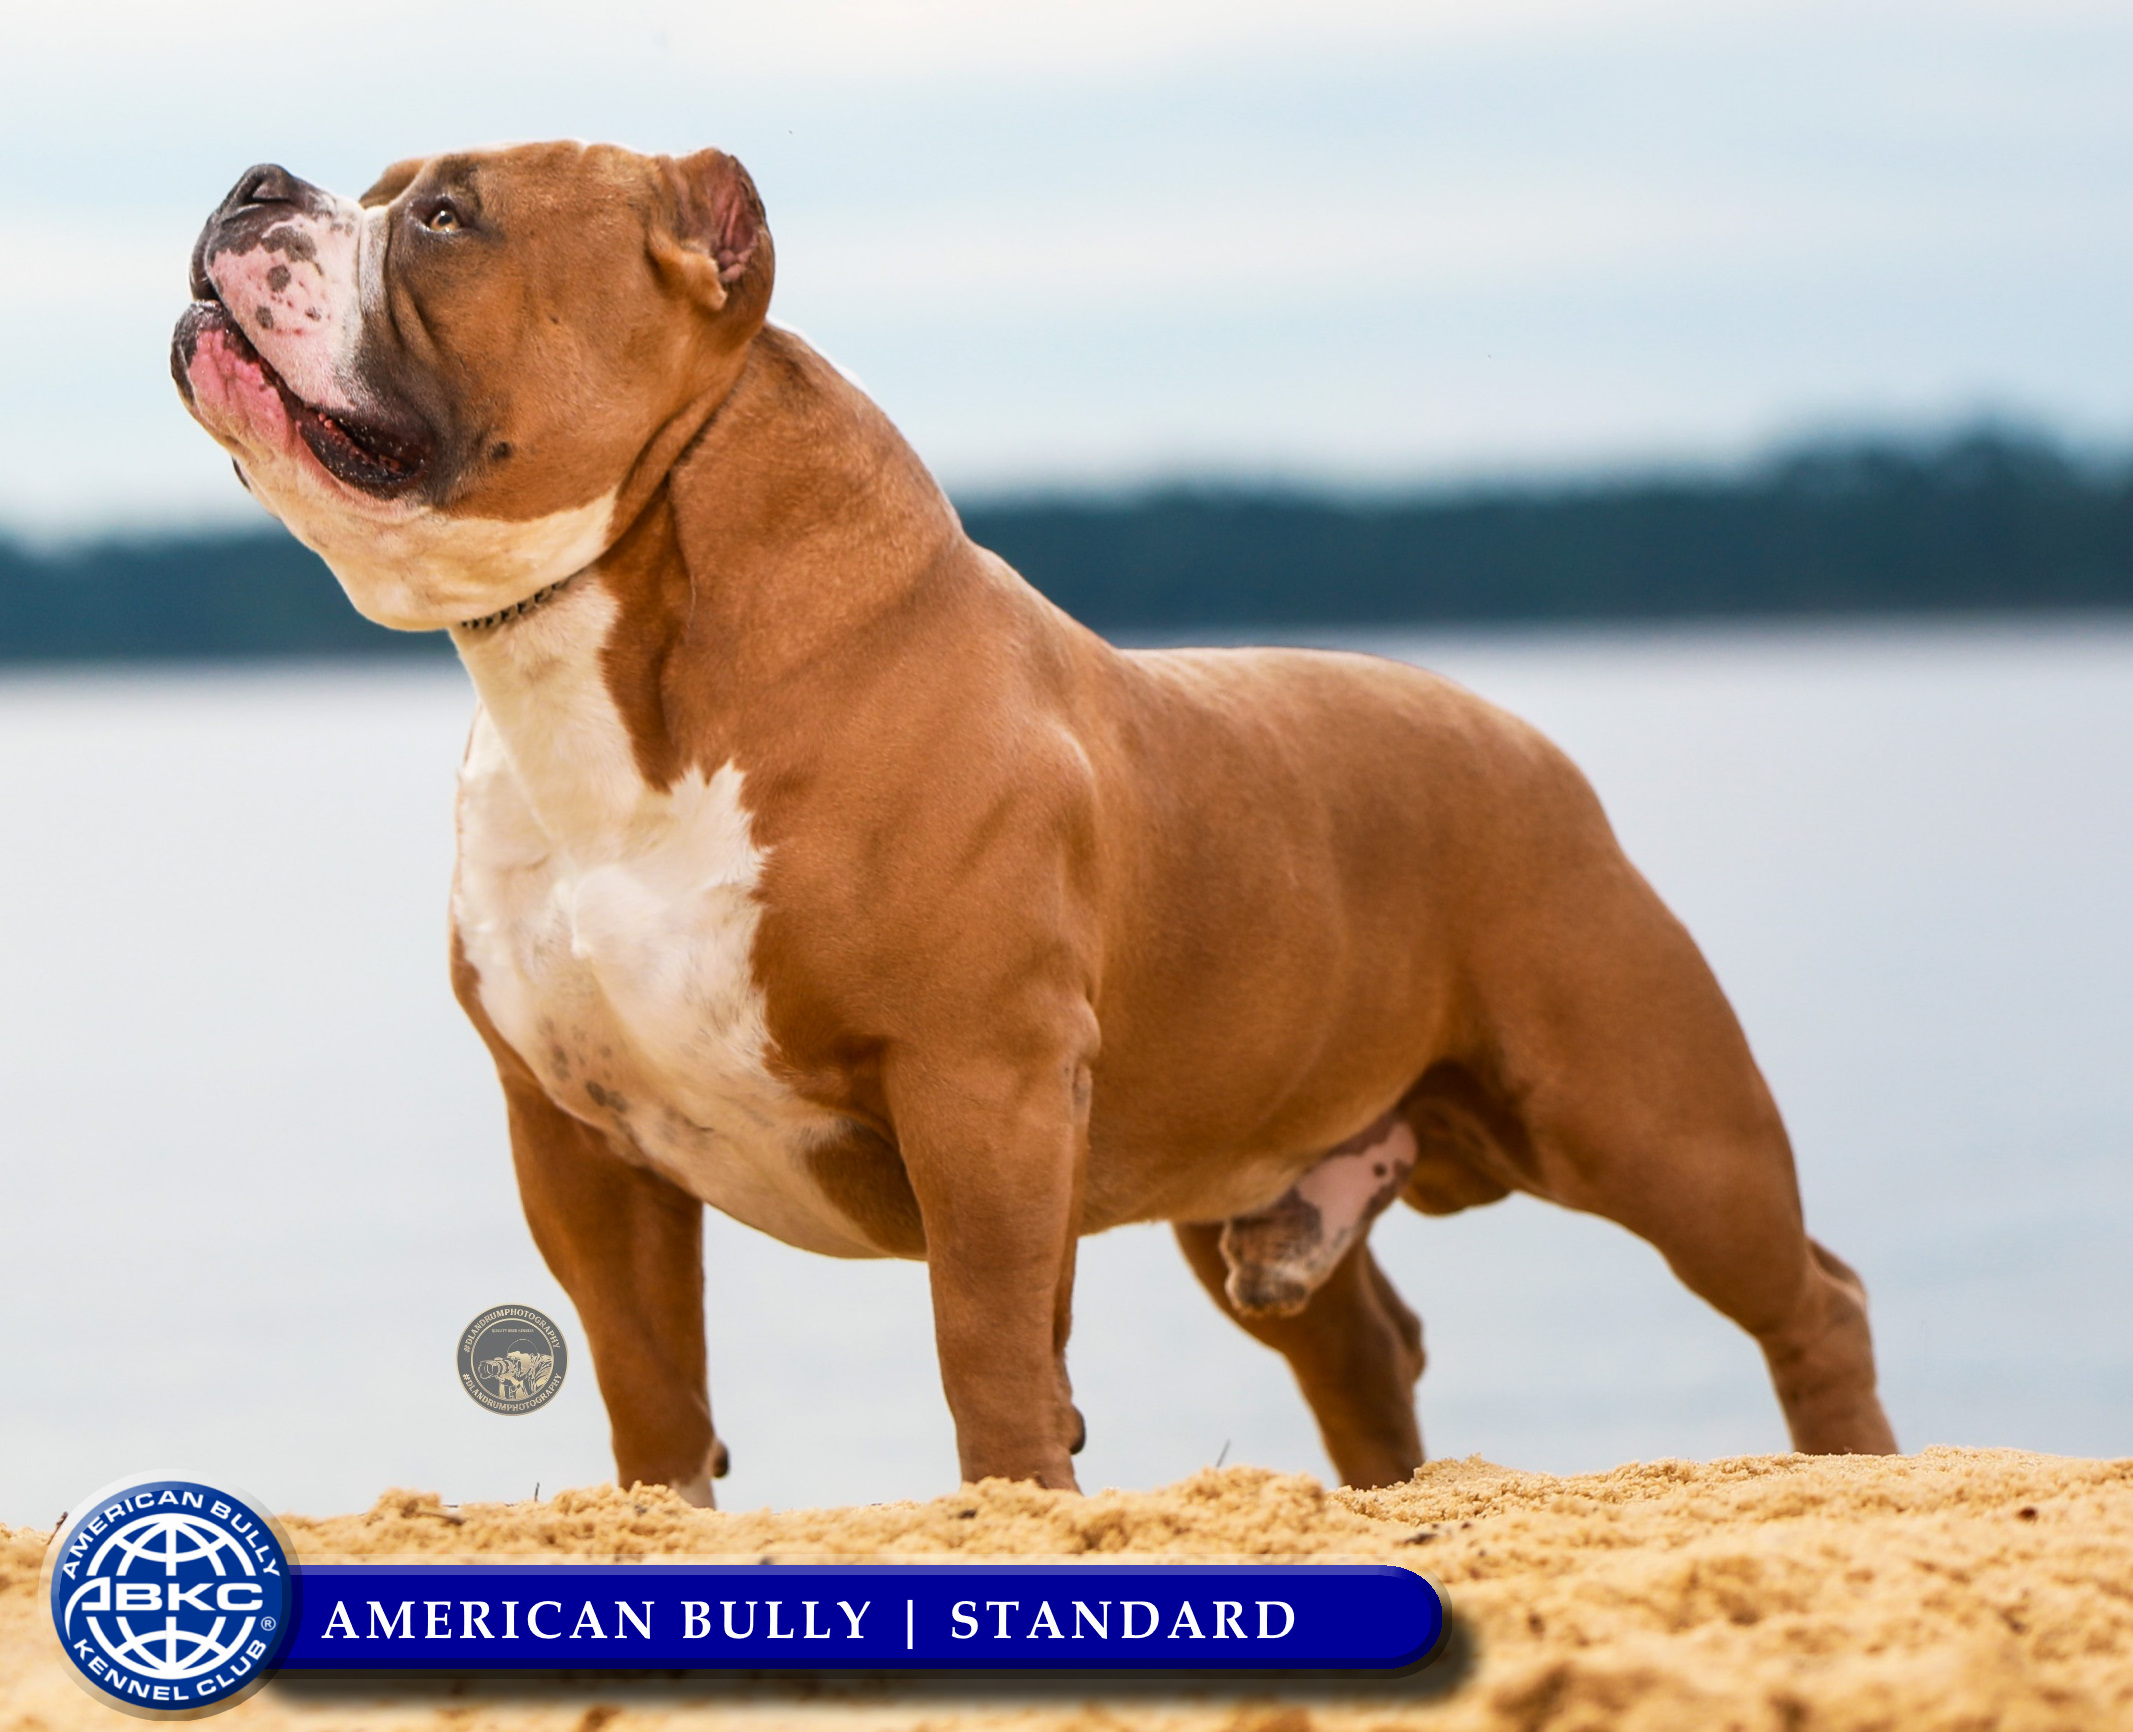 American Bully vs American Bulldog: What Are The Differences